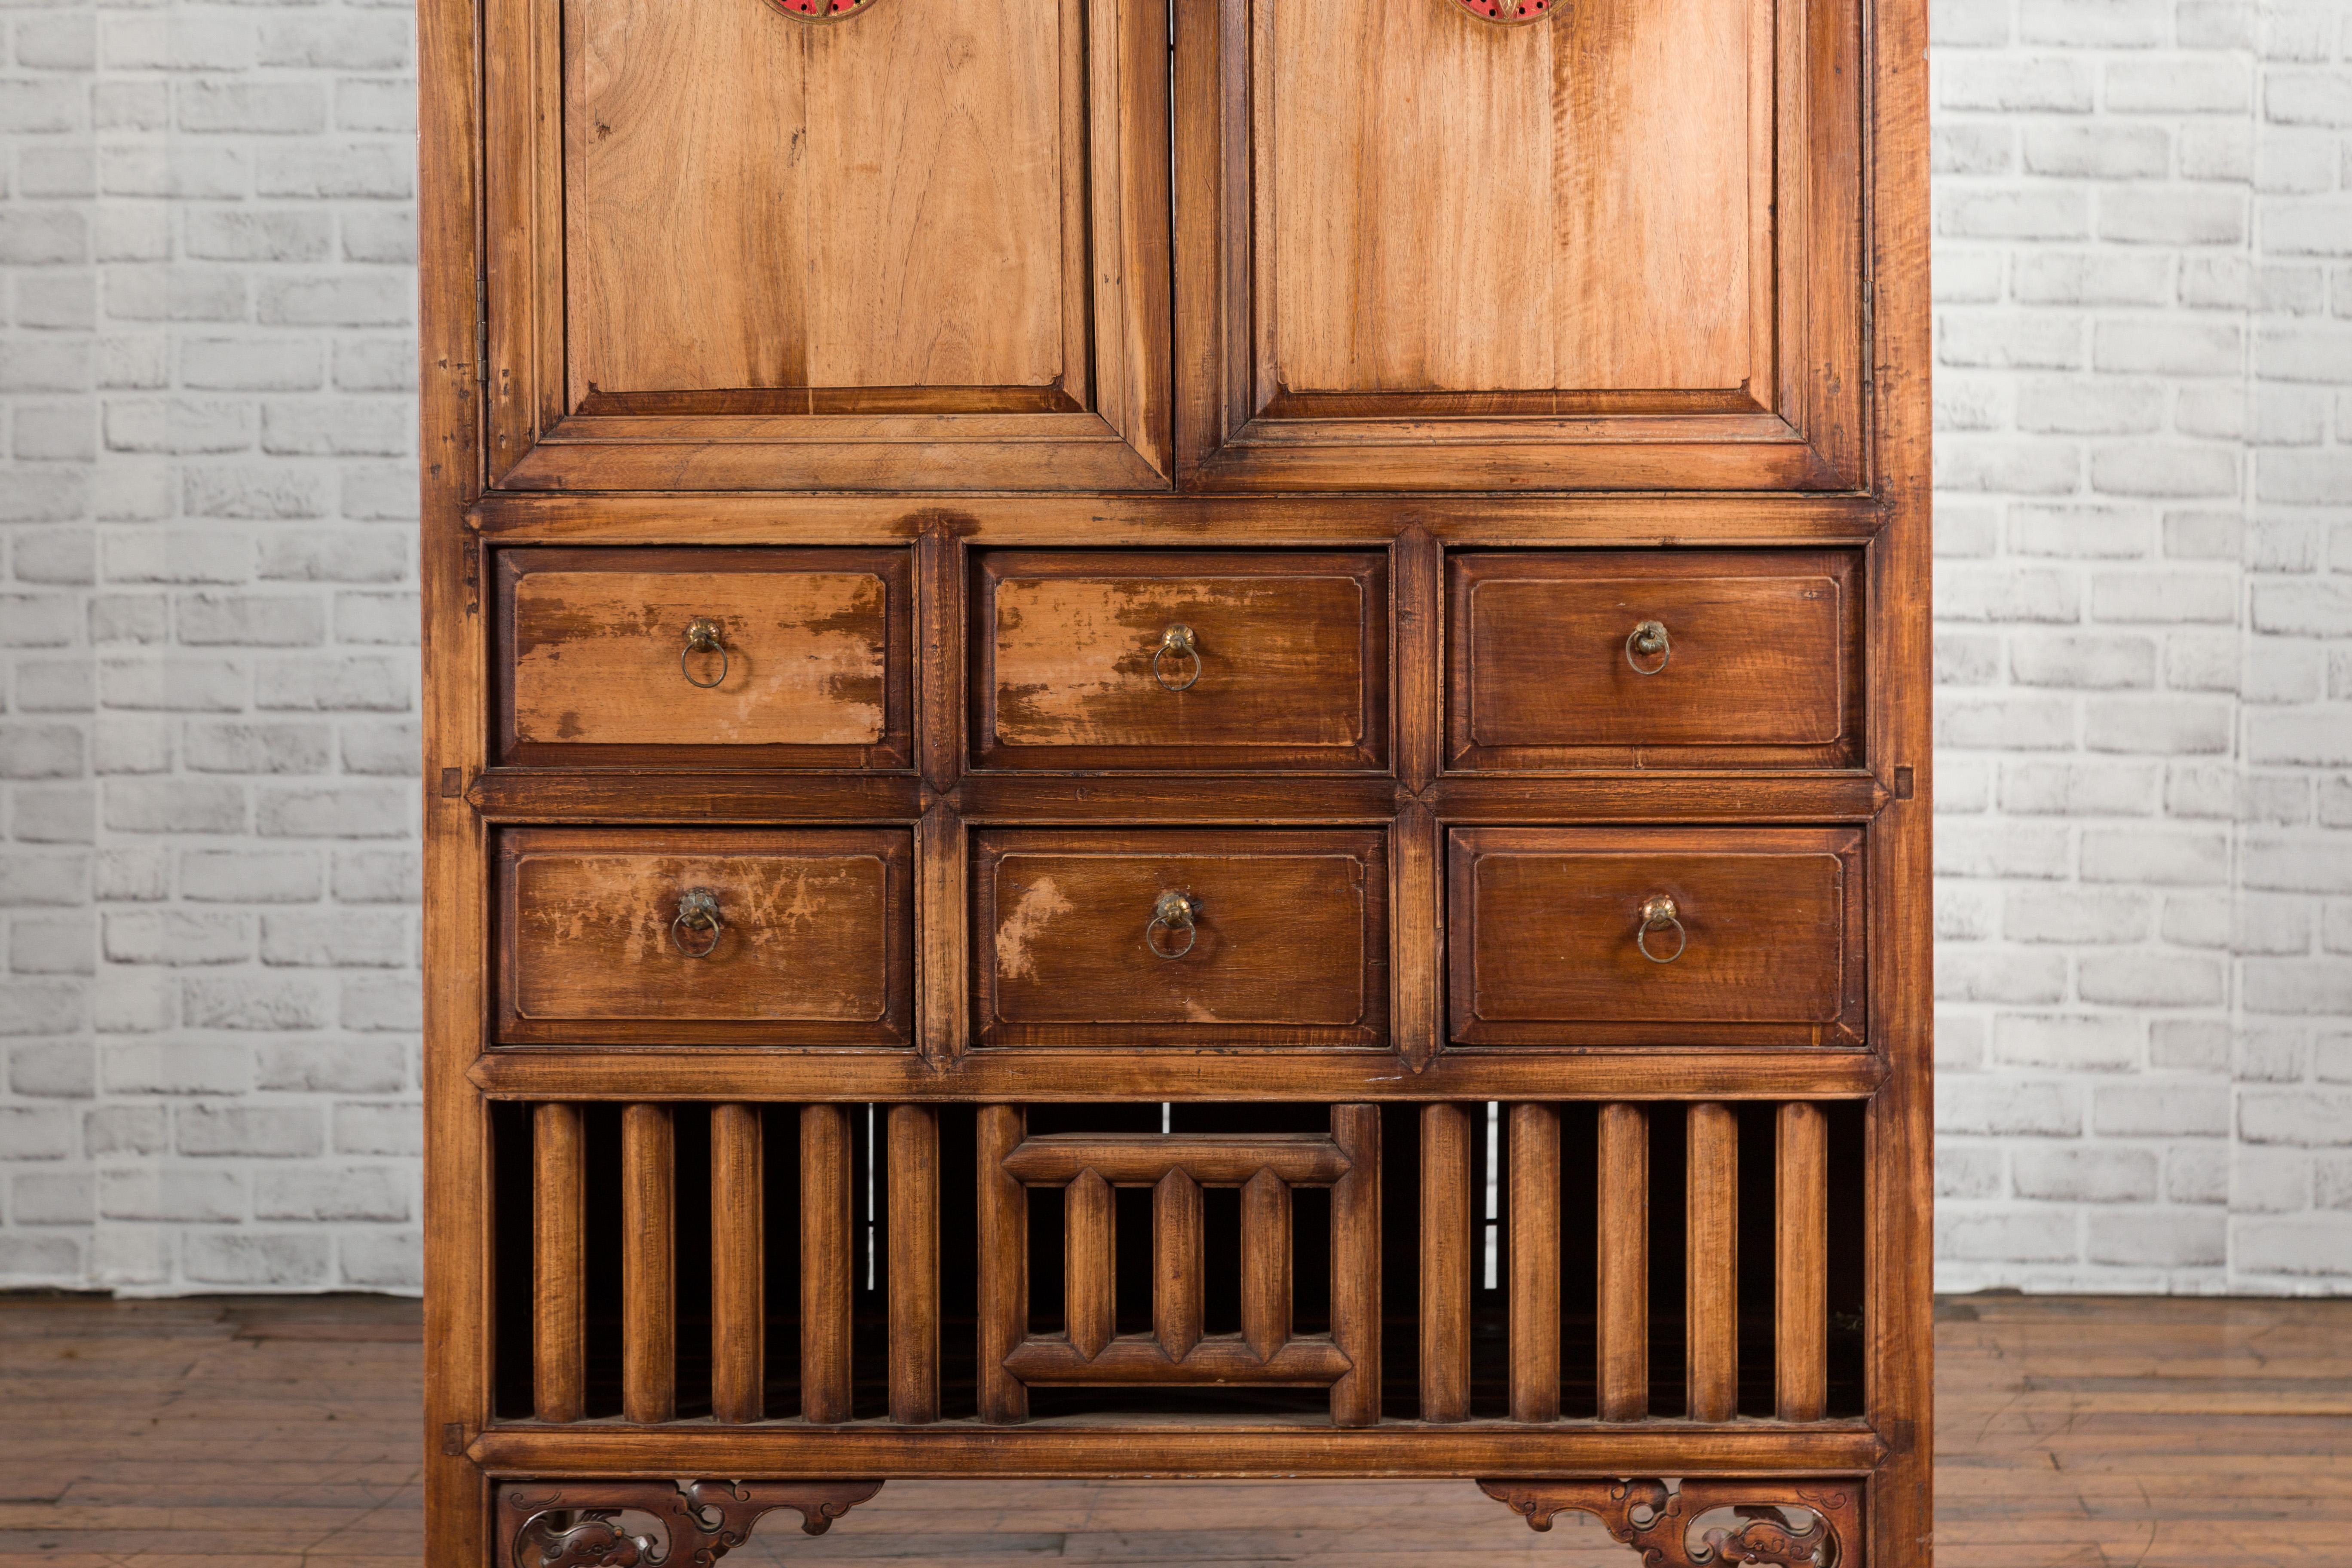 Vintage 1960s Hand-Carved Wooden Armoire from Taiwan with Doors and Drawers In Good Condition For Sale In Yonkers, NY